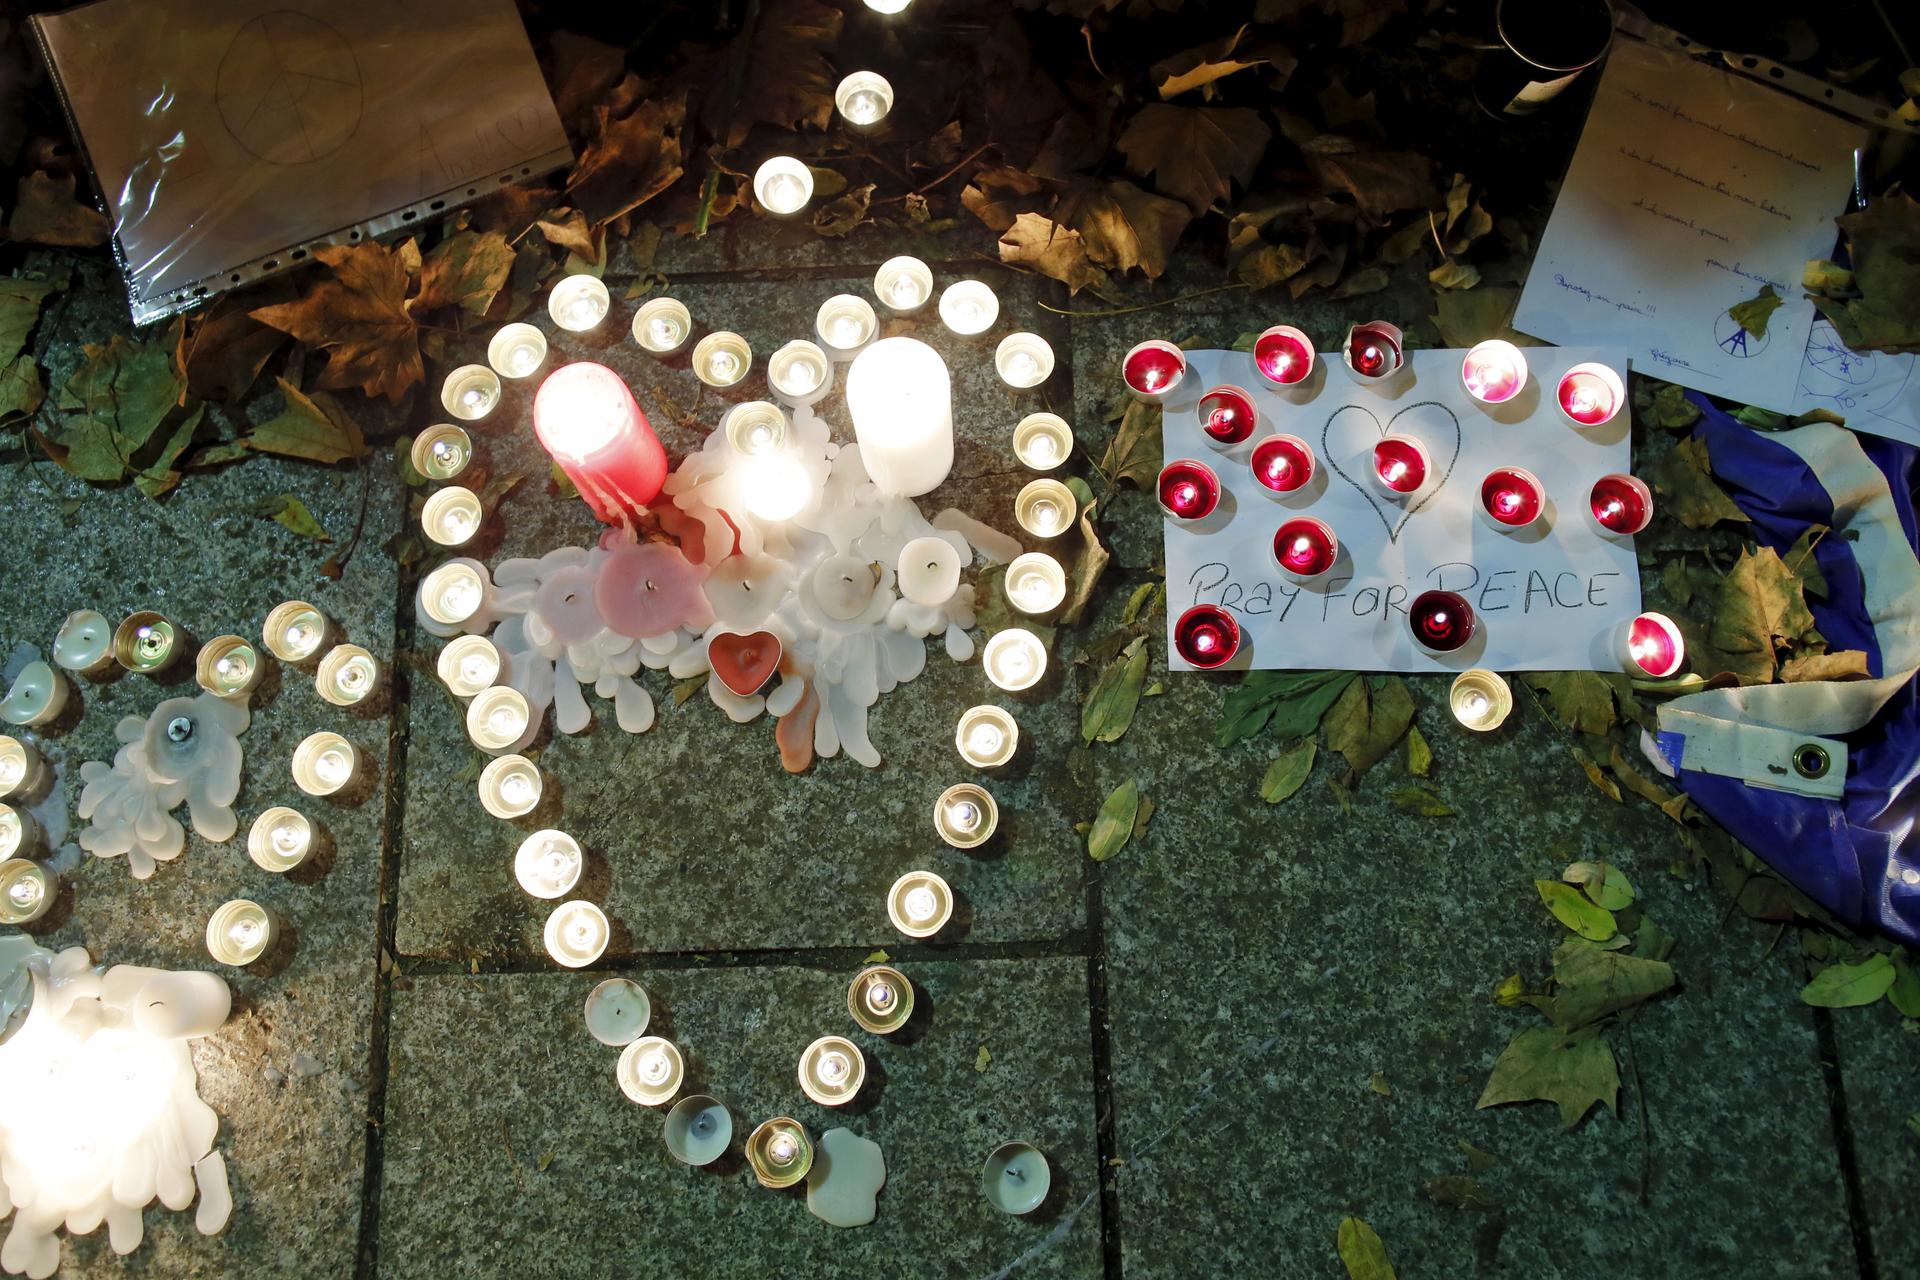 Candles burn as a tribute to victims near the site of the attack at the Bataclan concert hall in Paris in November, 2015.